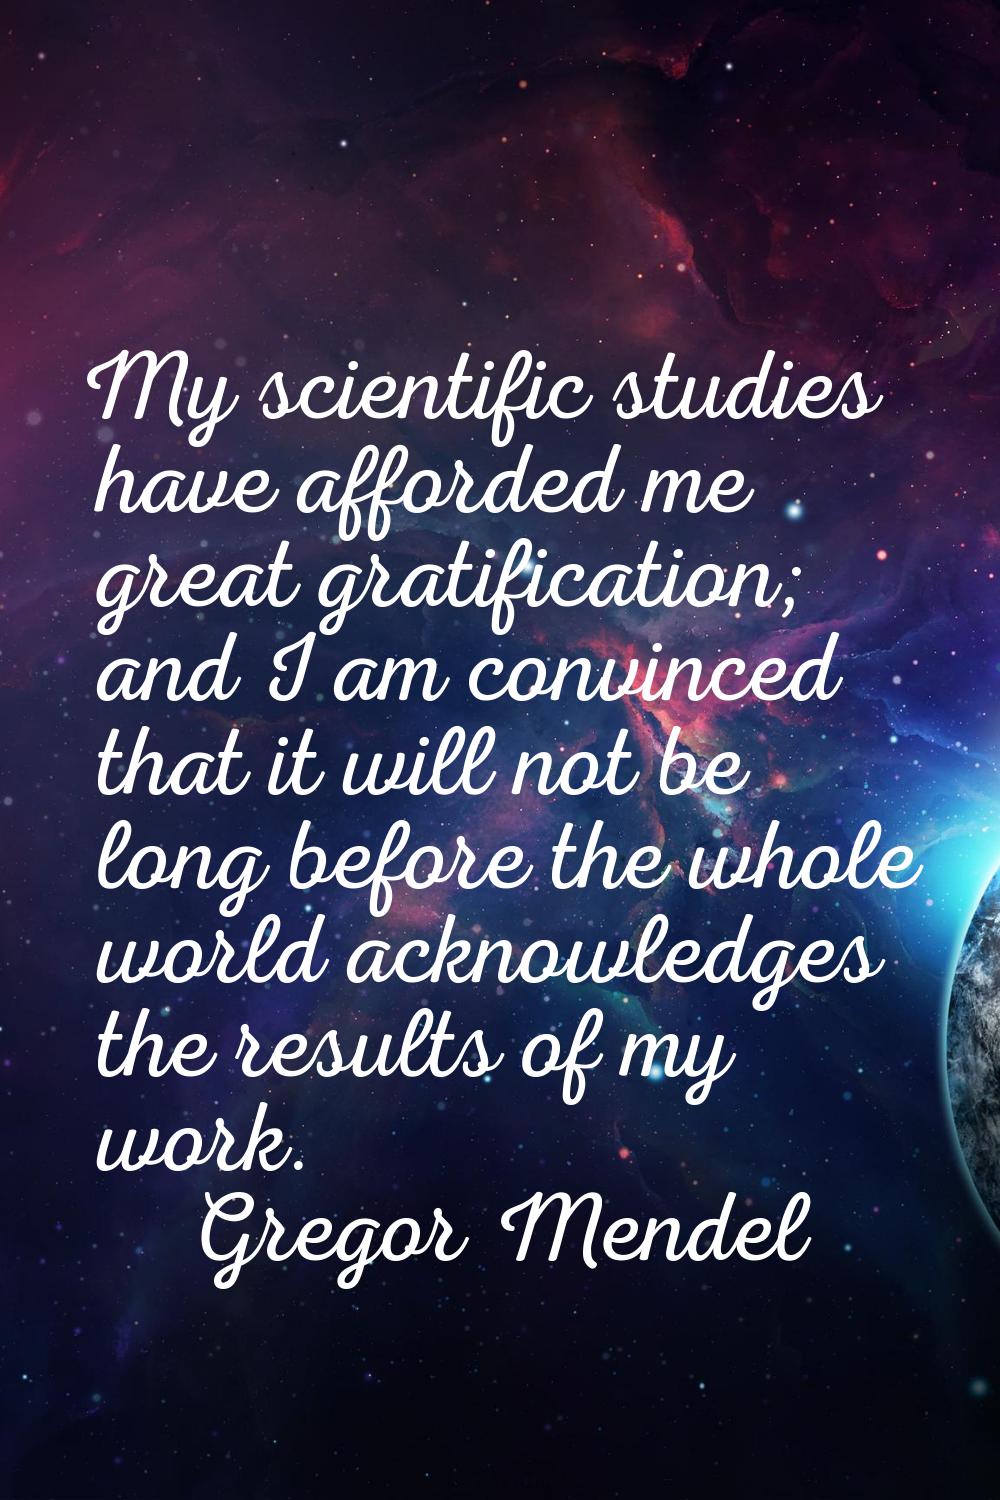 My scientific studies have afforded me great gratification; and I am convinced that it will not be 